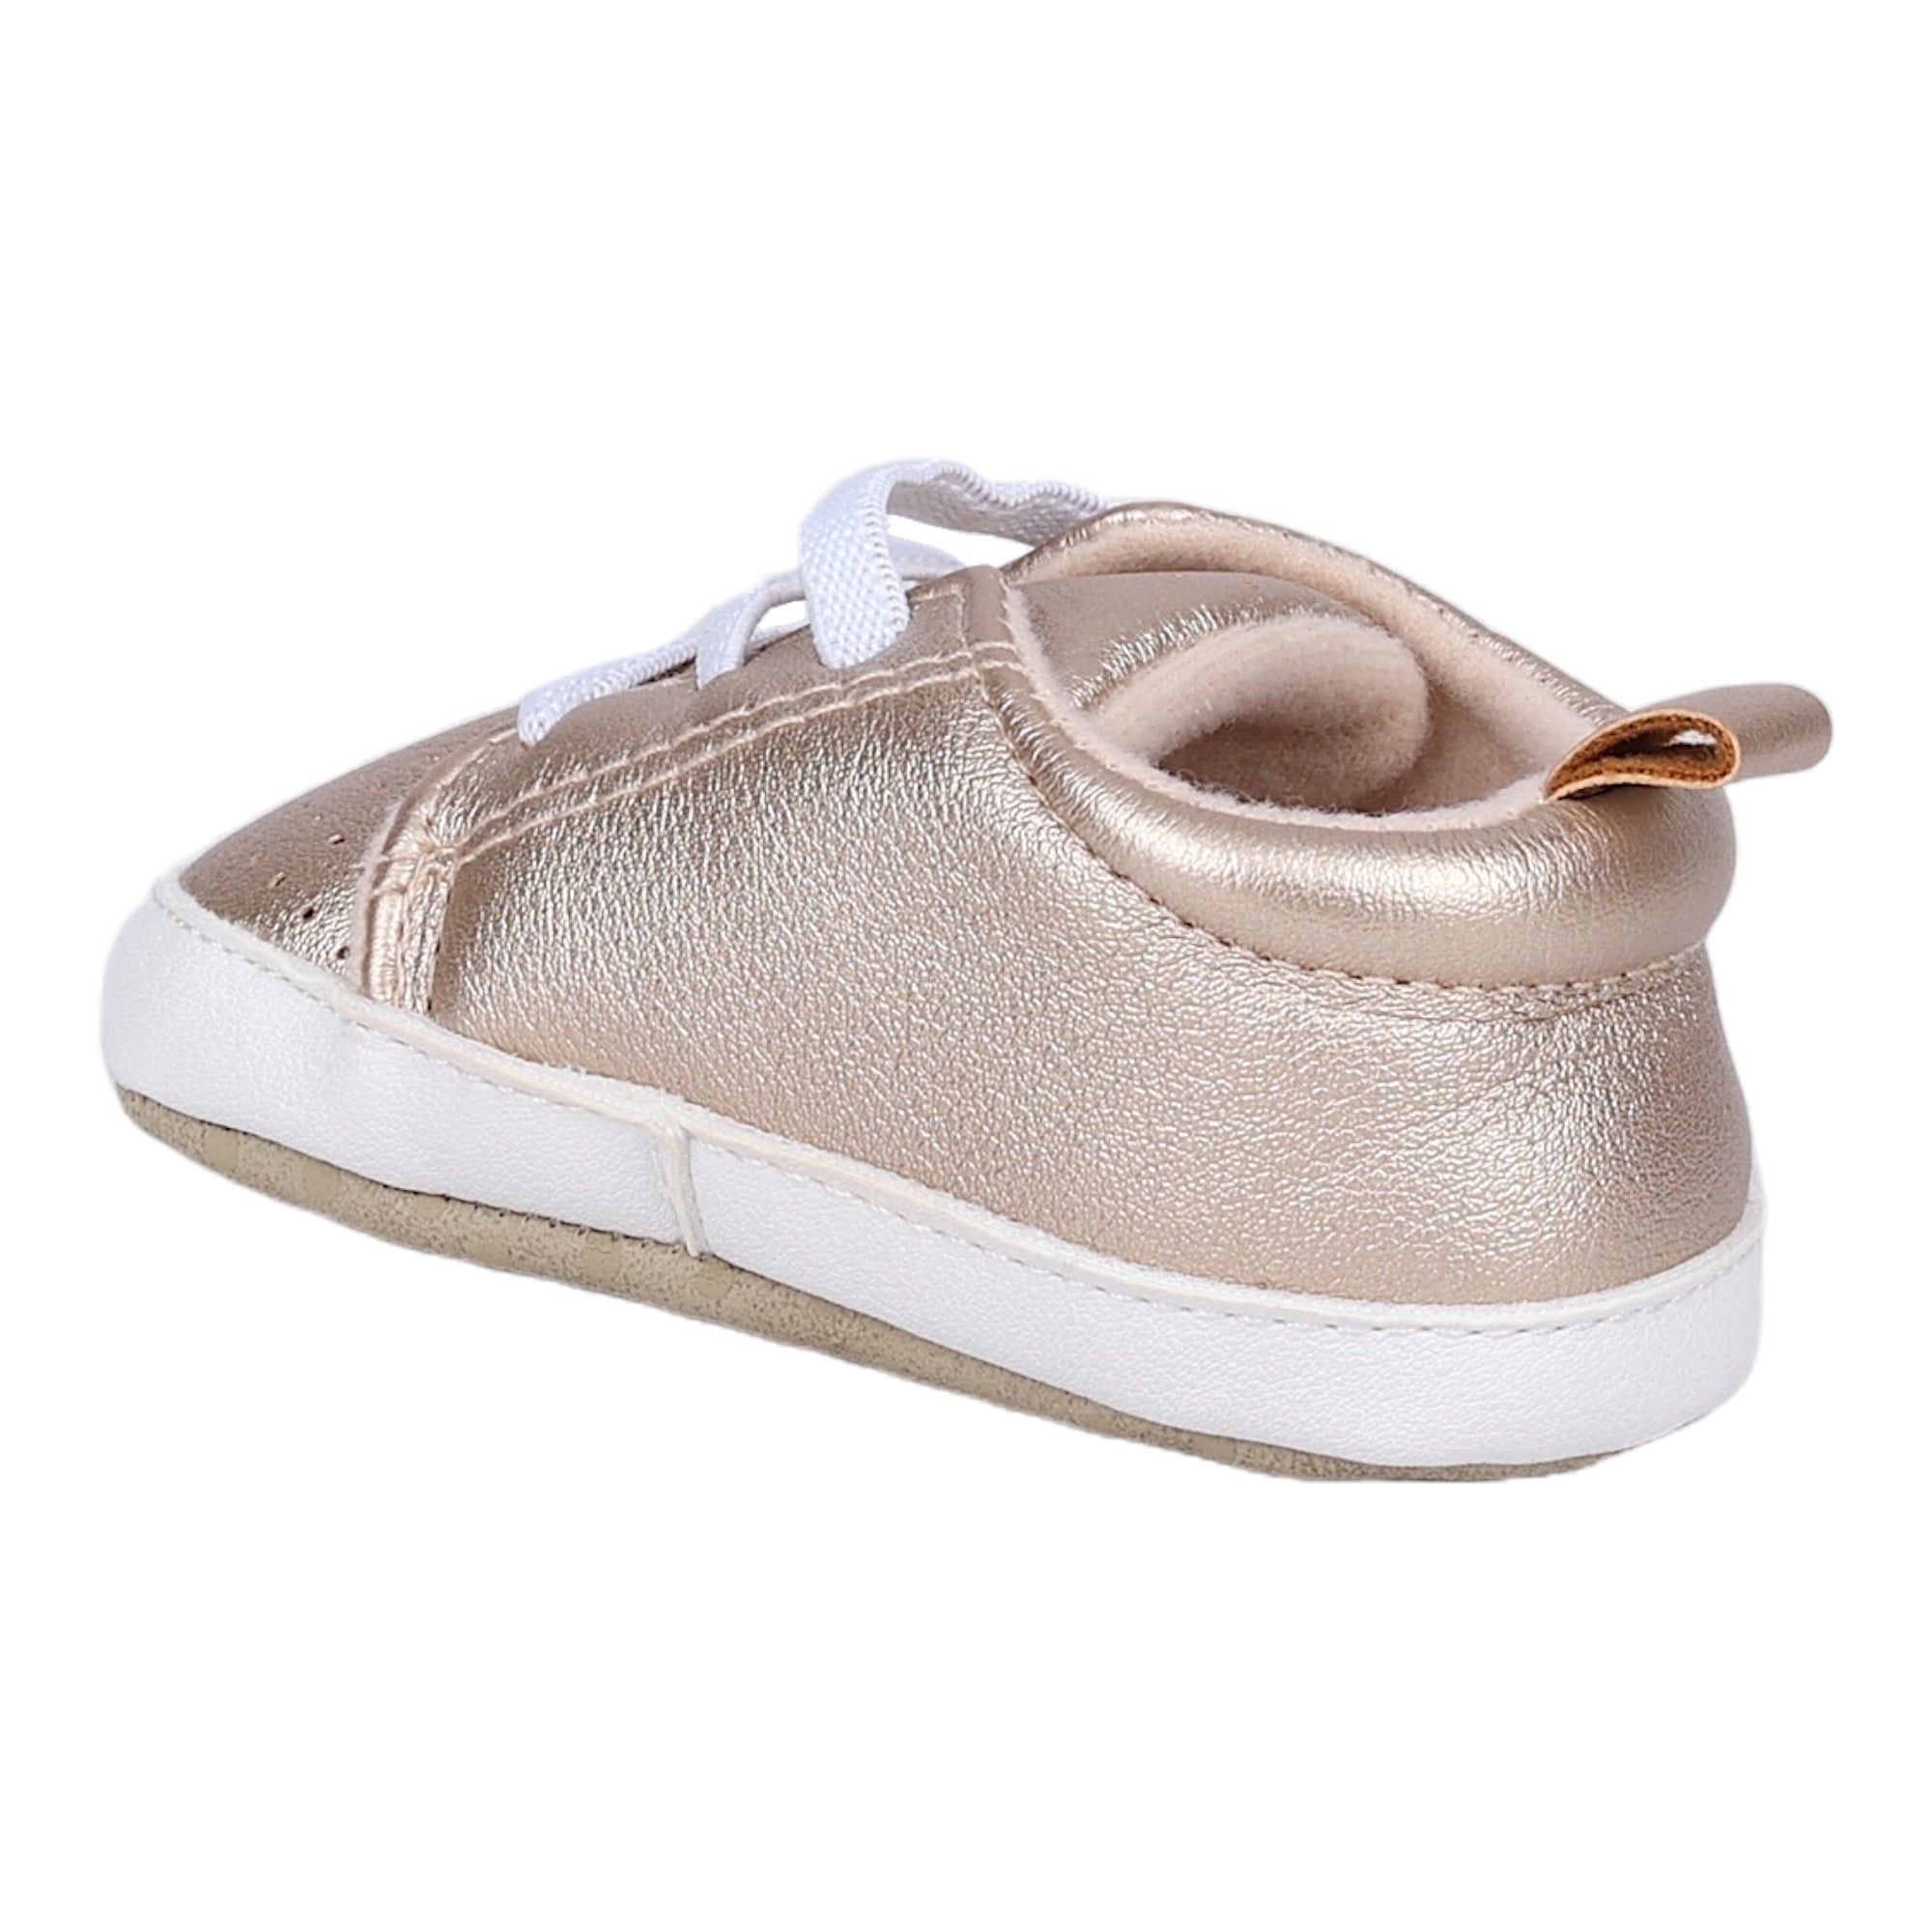 Baby Moo Dotted Breathable Lace-Up Design Anti-Skid Vegan Leather Sneakers - Gold